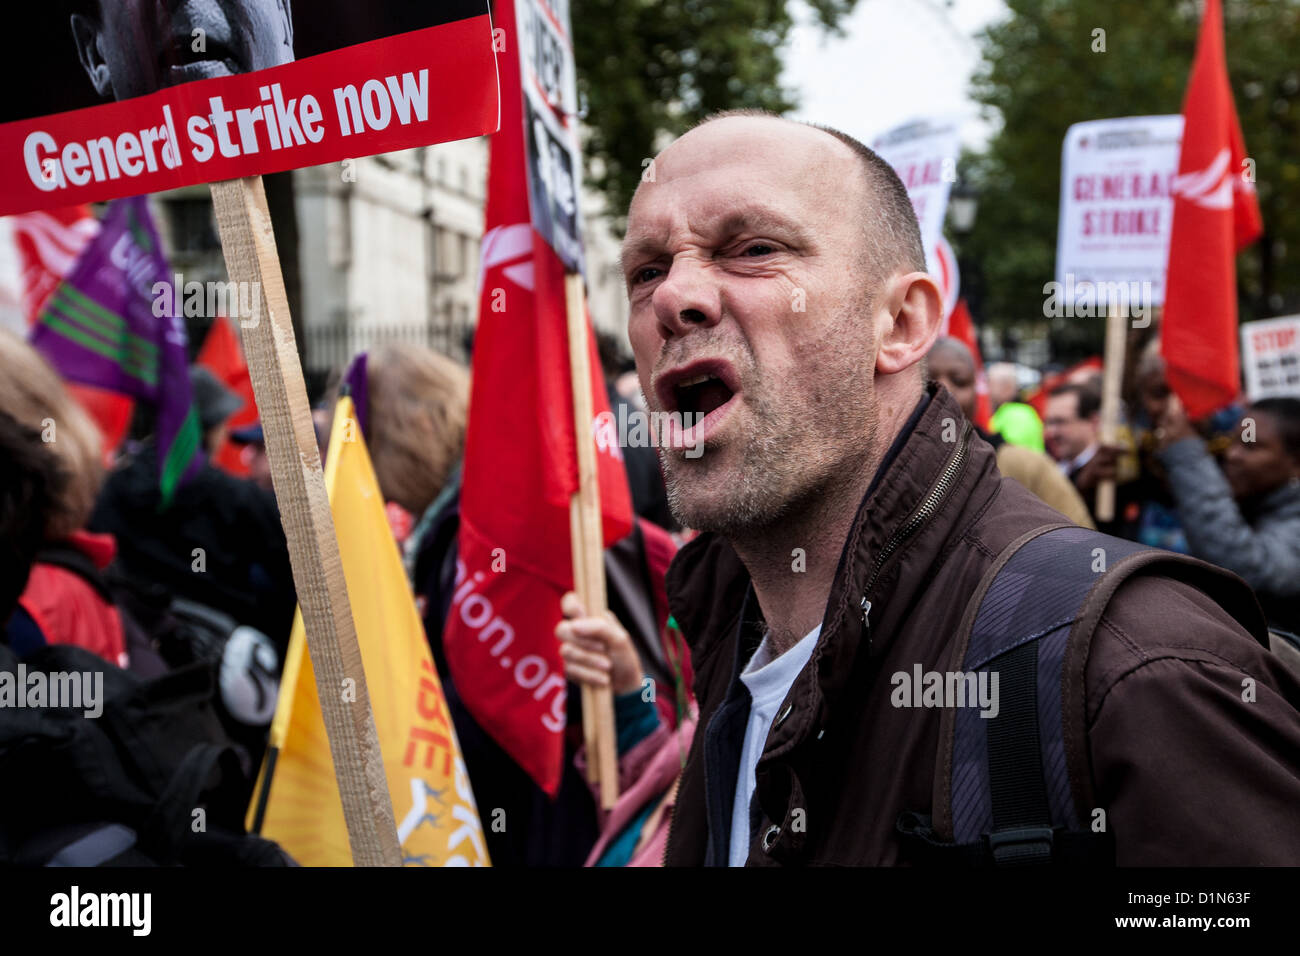 Angry Protester Stock Photos & Angry Protester Stock Images - Alamy1300 x 956